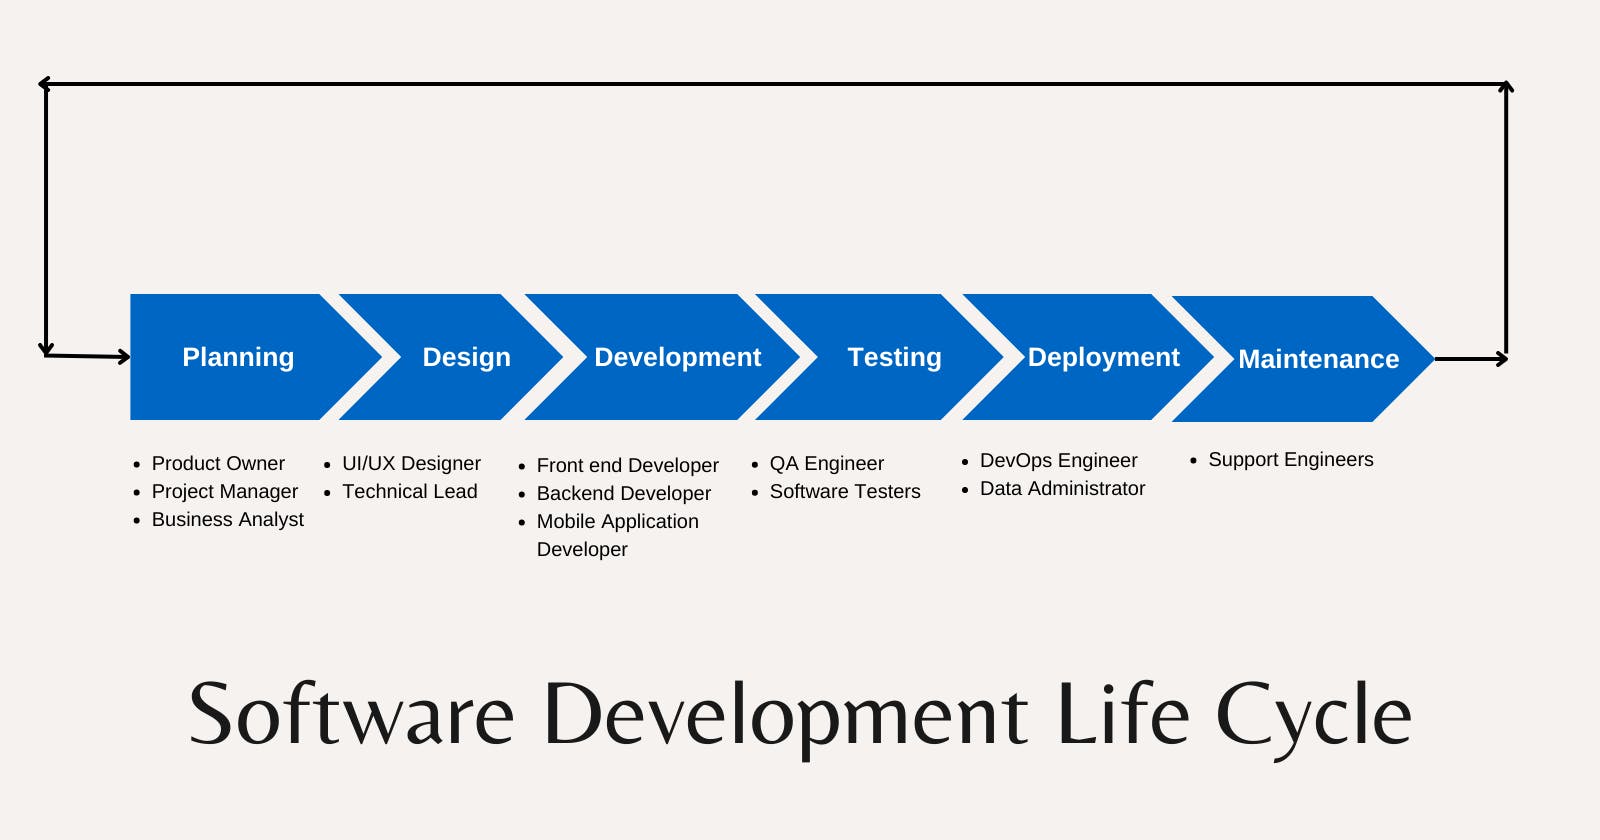 Overview of the Software Development Life Cycle